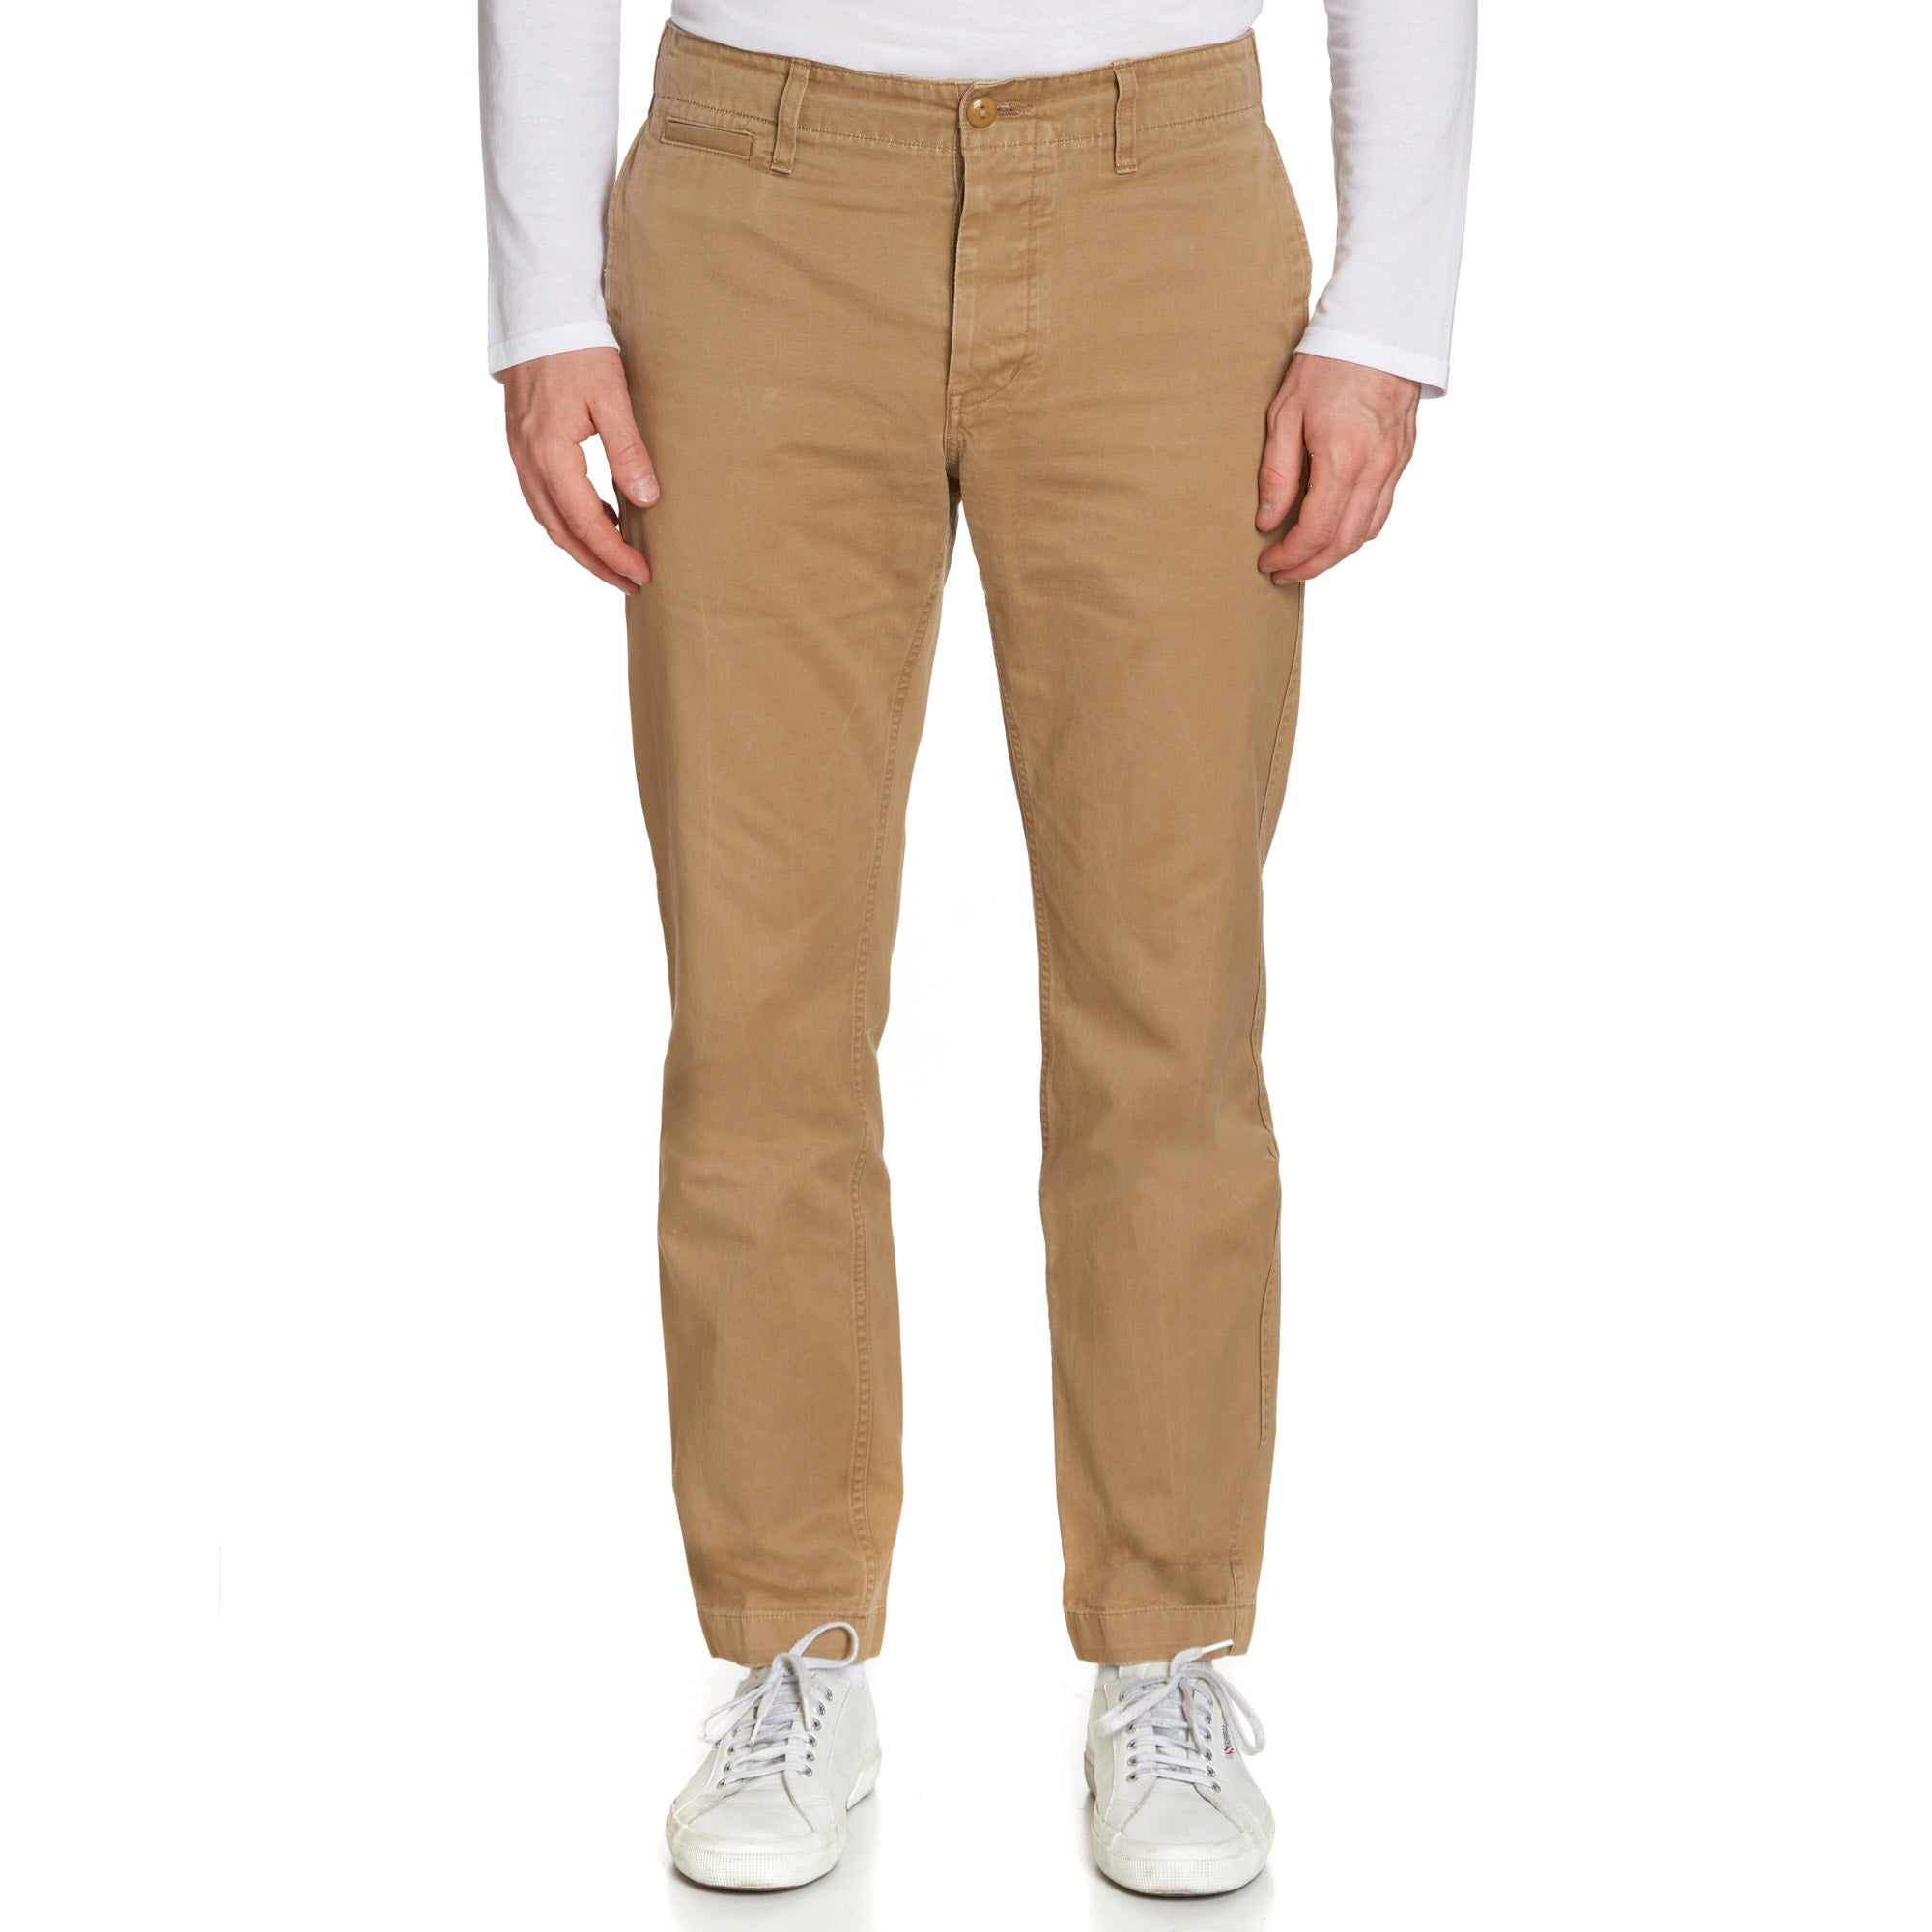 NIGEL CABOURN Tan Cotton Officer's Chino Pants US 33 34 Slim Fit Japan NIGEL CABOURN